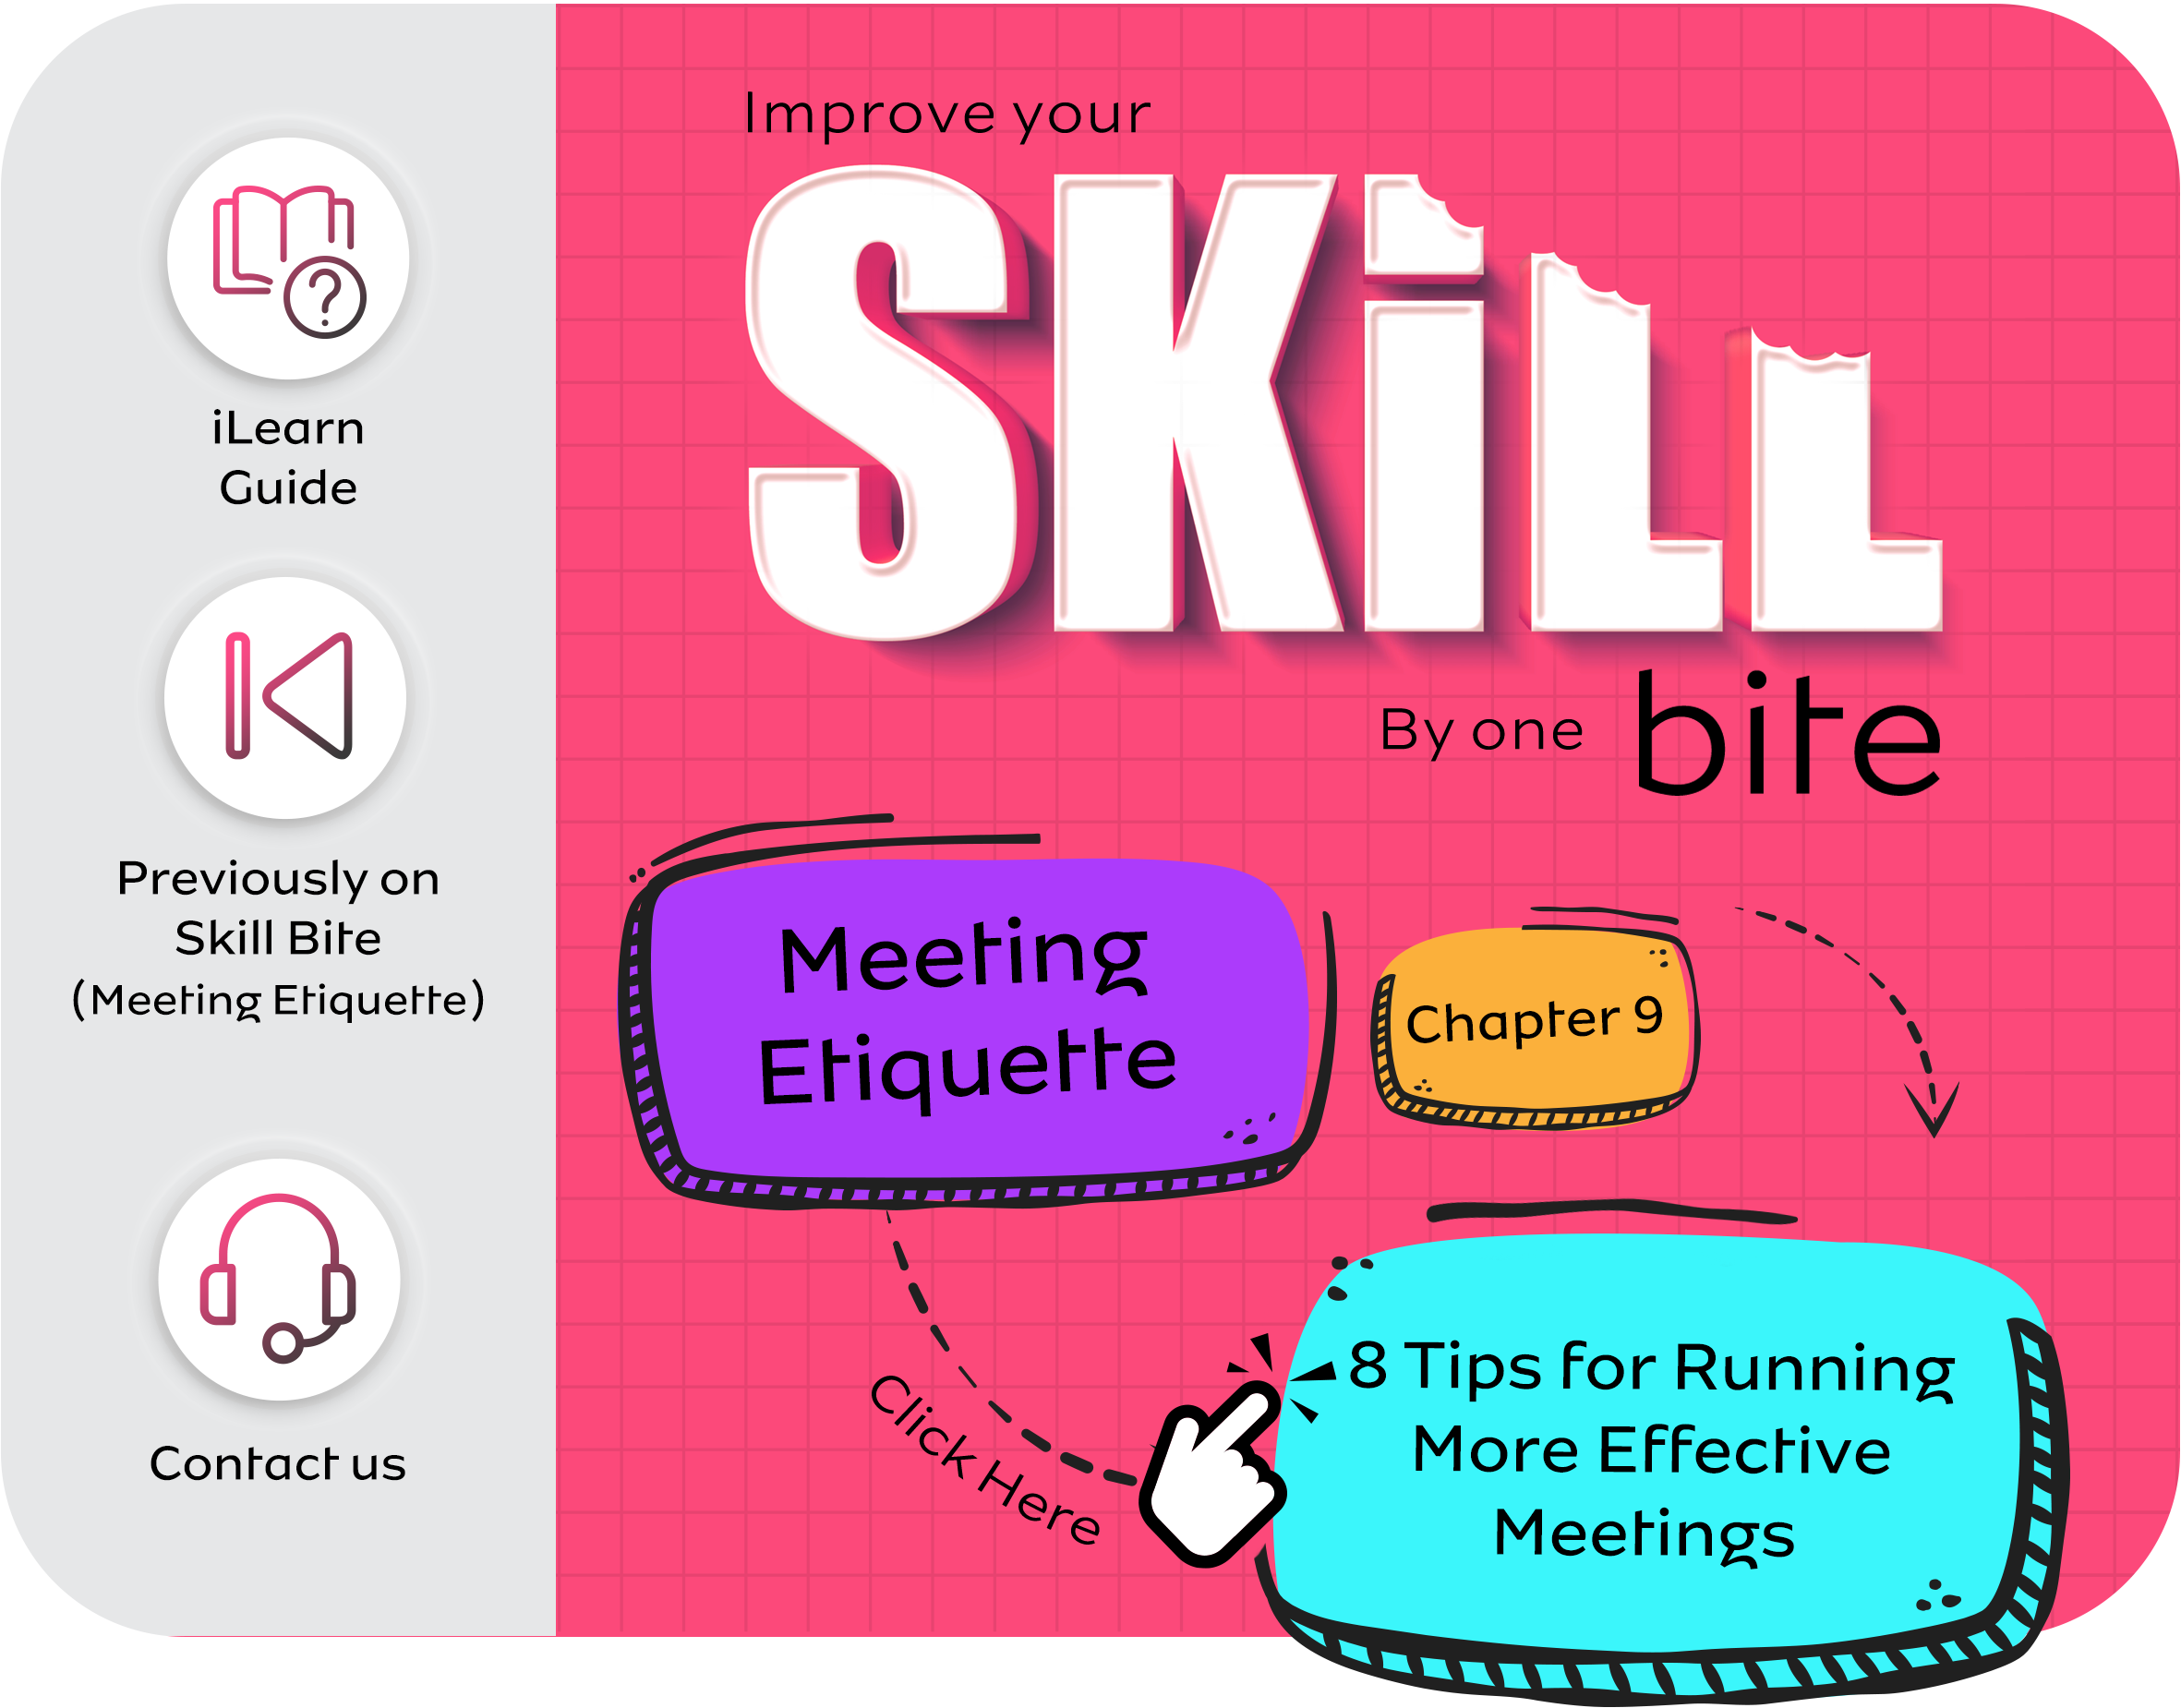 8 Tips for Running More Effective Meetings